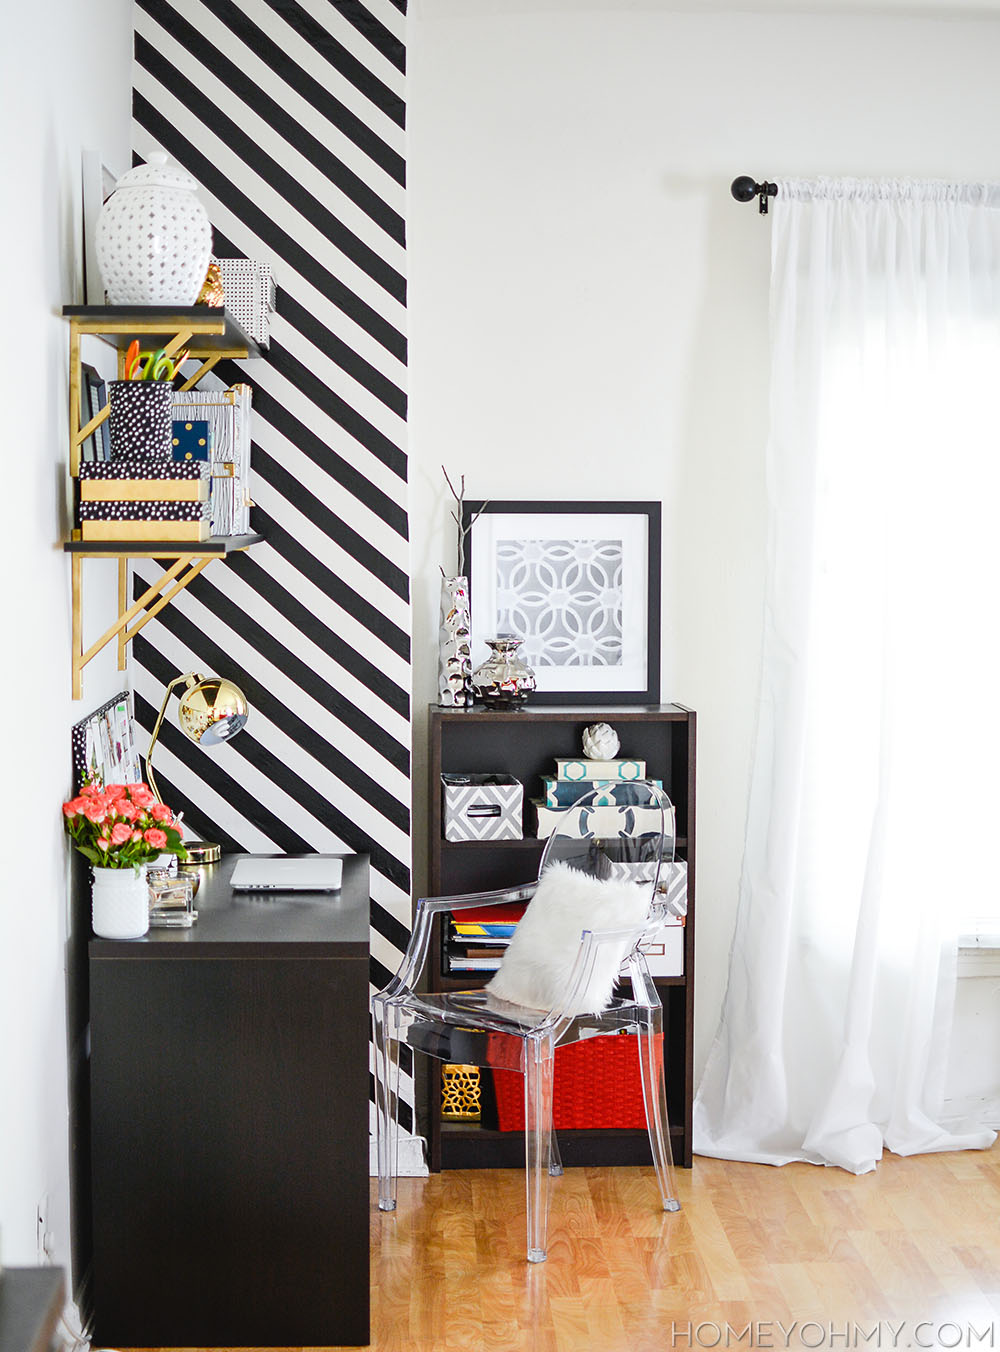 How to Create A Striped Accent Wall Without Paint